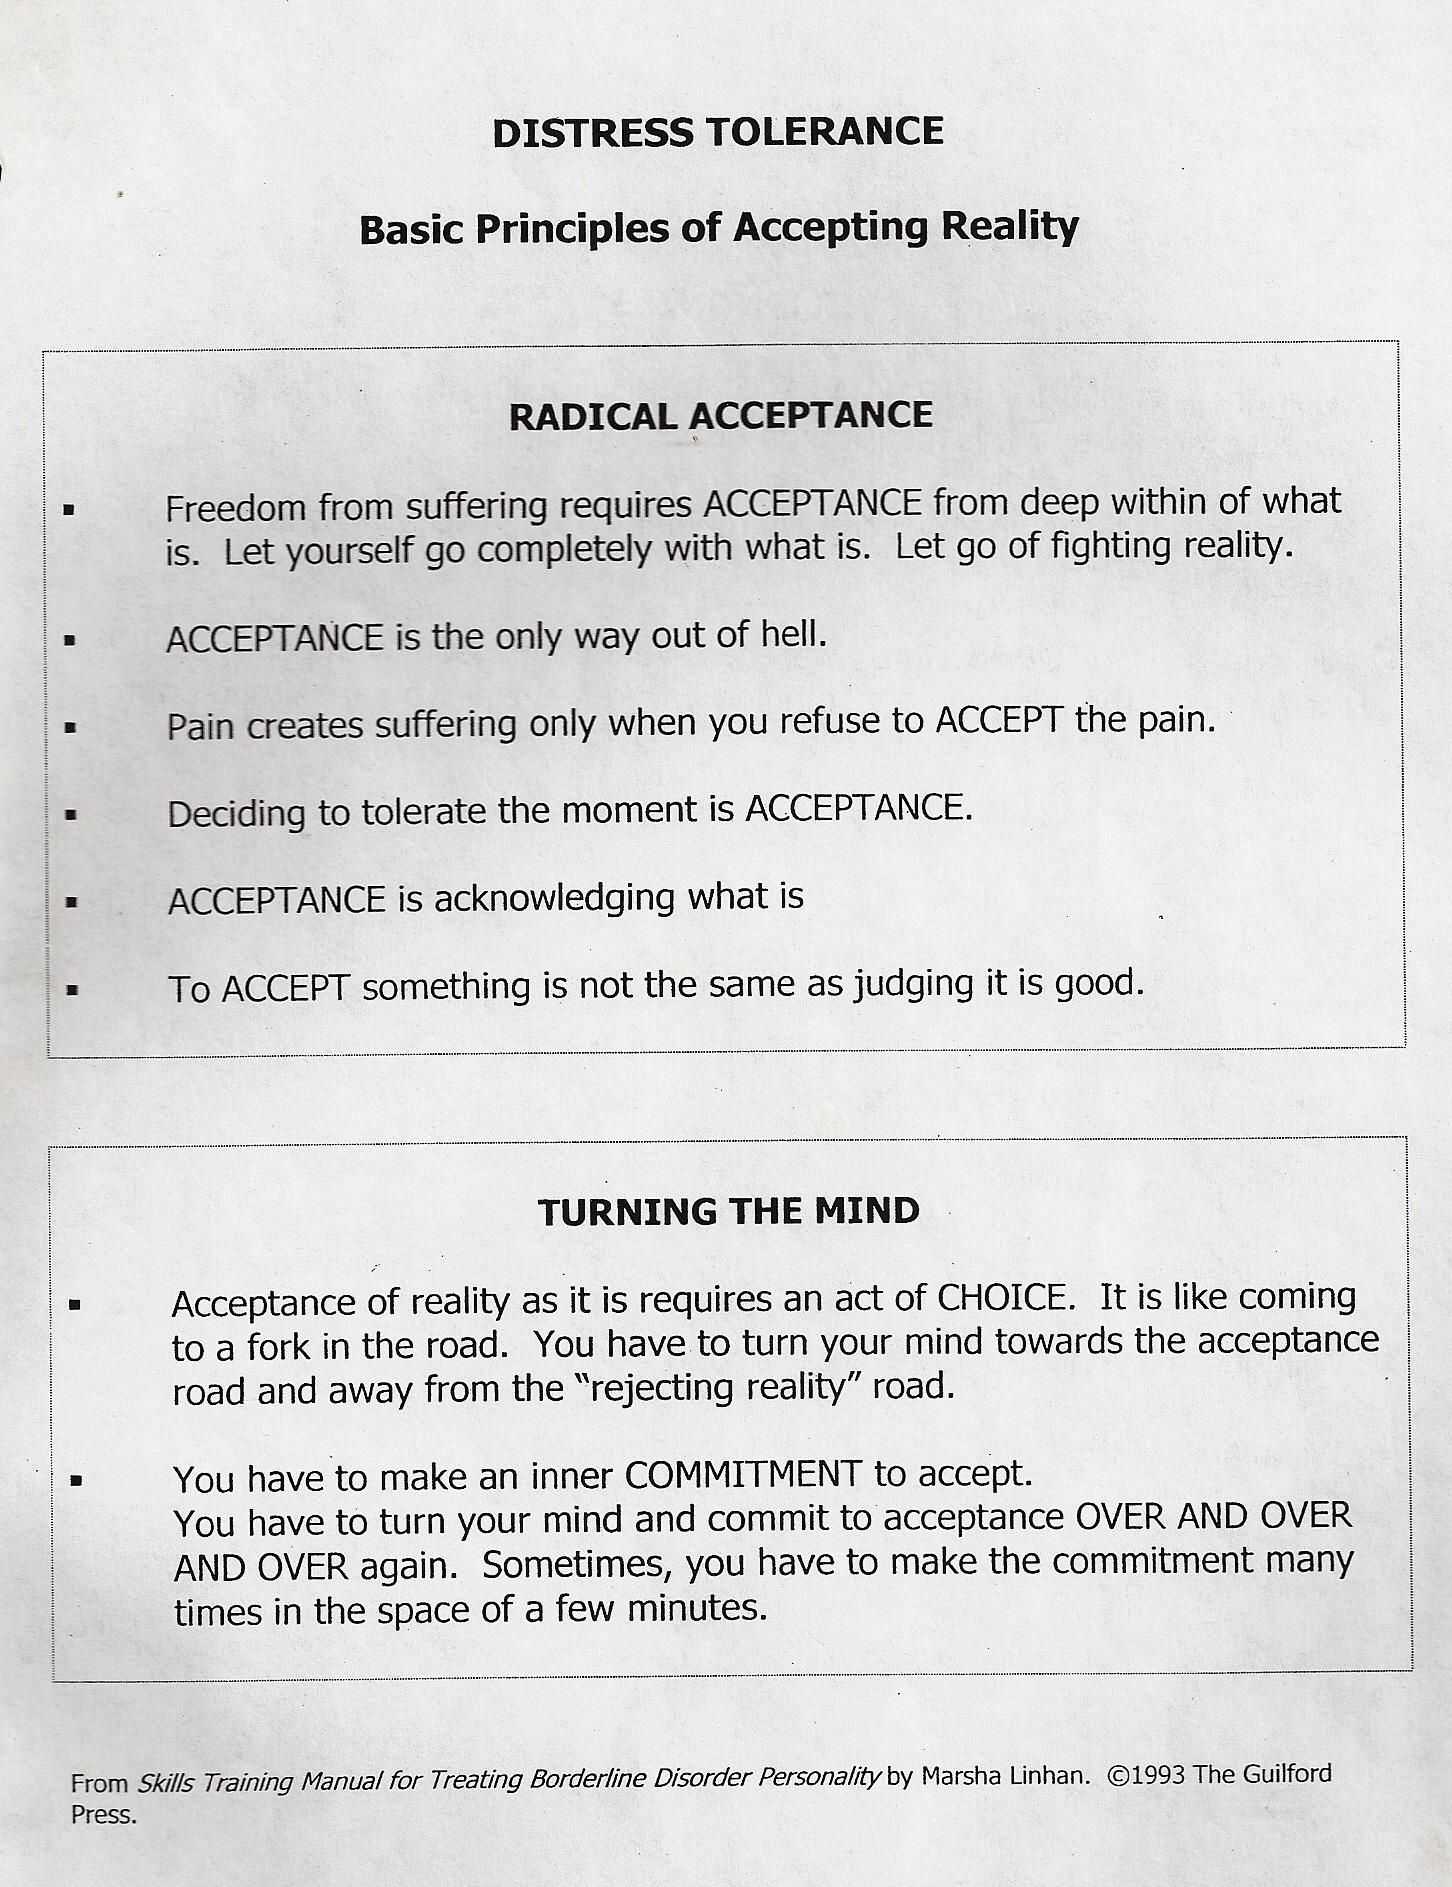 Dbt therapy Worksheets as Well as Distress tolerance Radical Acceptance Turning the Mind